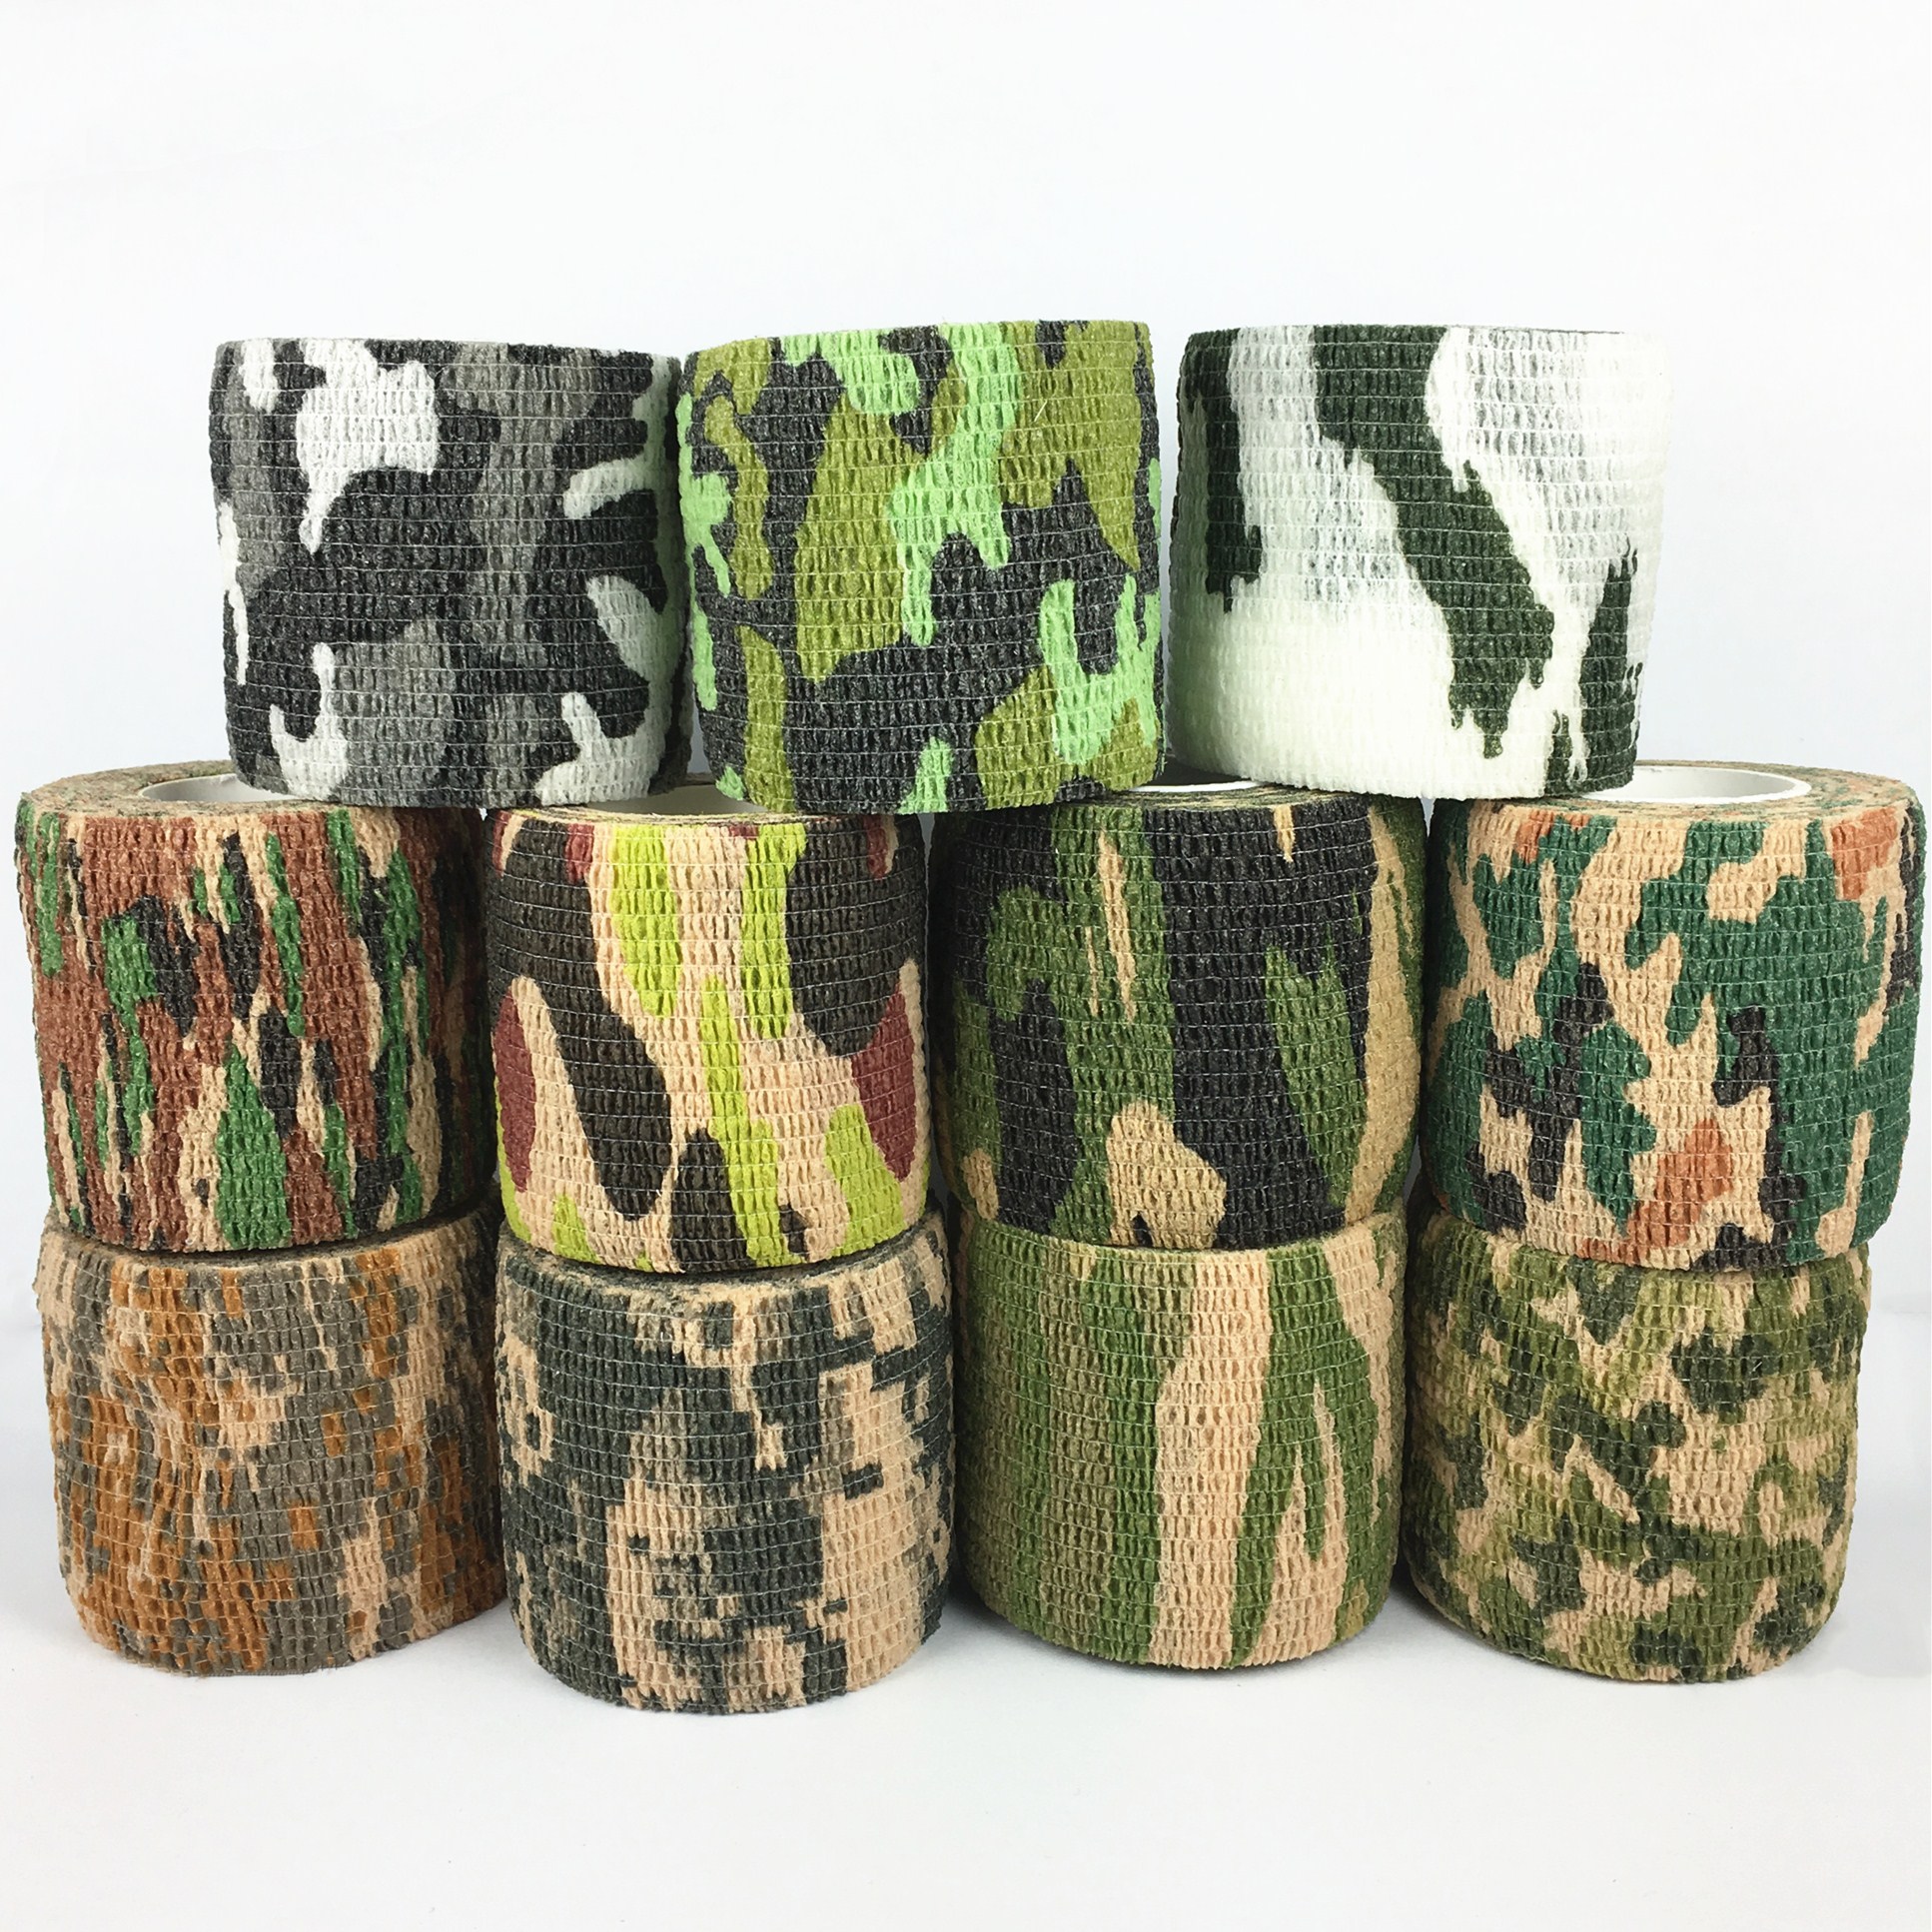 5cm*4.5m Camo Waterproof Wrap Hunting Camping Hiking Camouflage Stealth Tape 